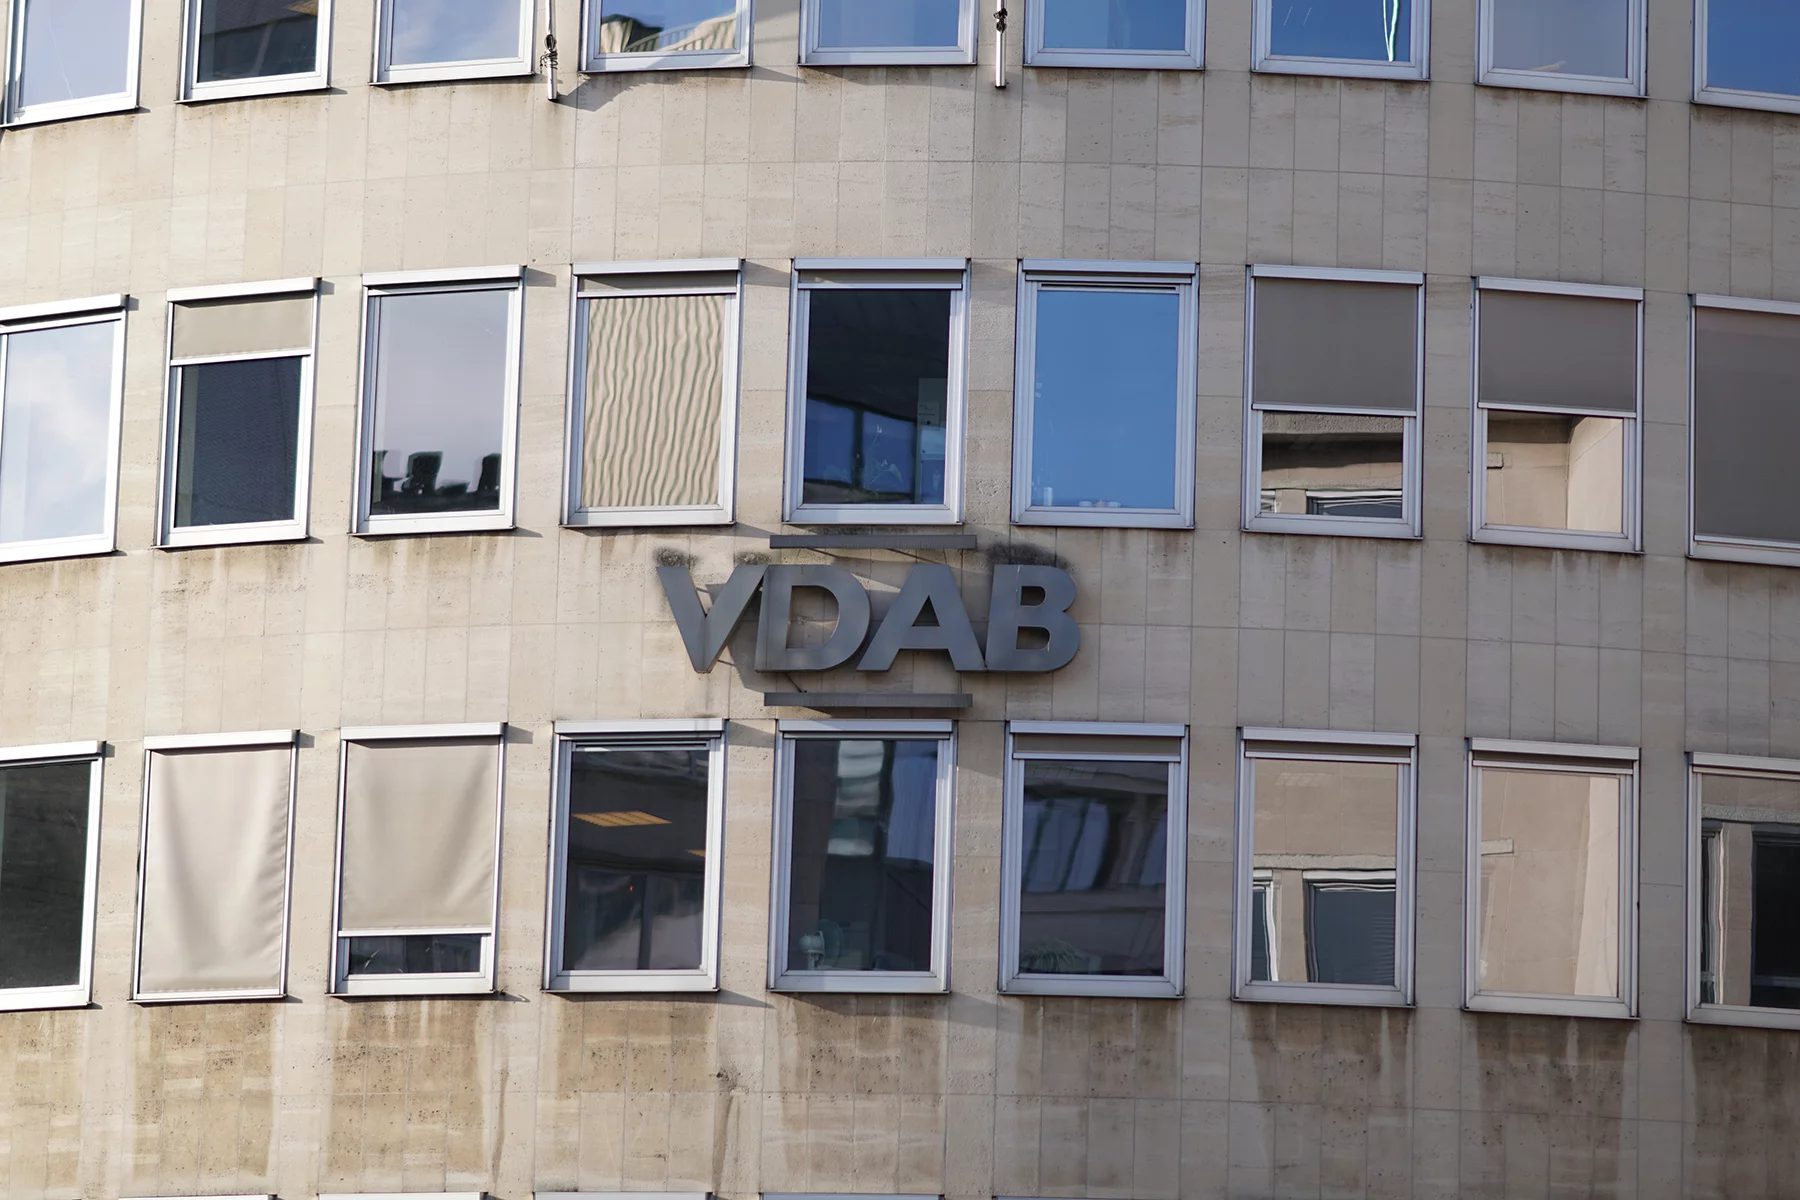 A close-up of a modern, beige building with the sign 'VDAB'